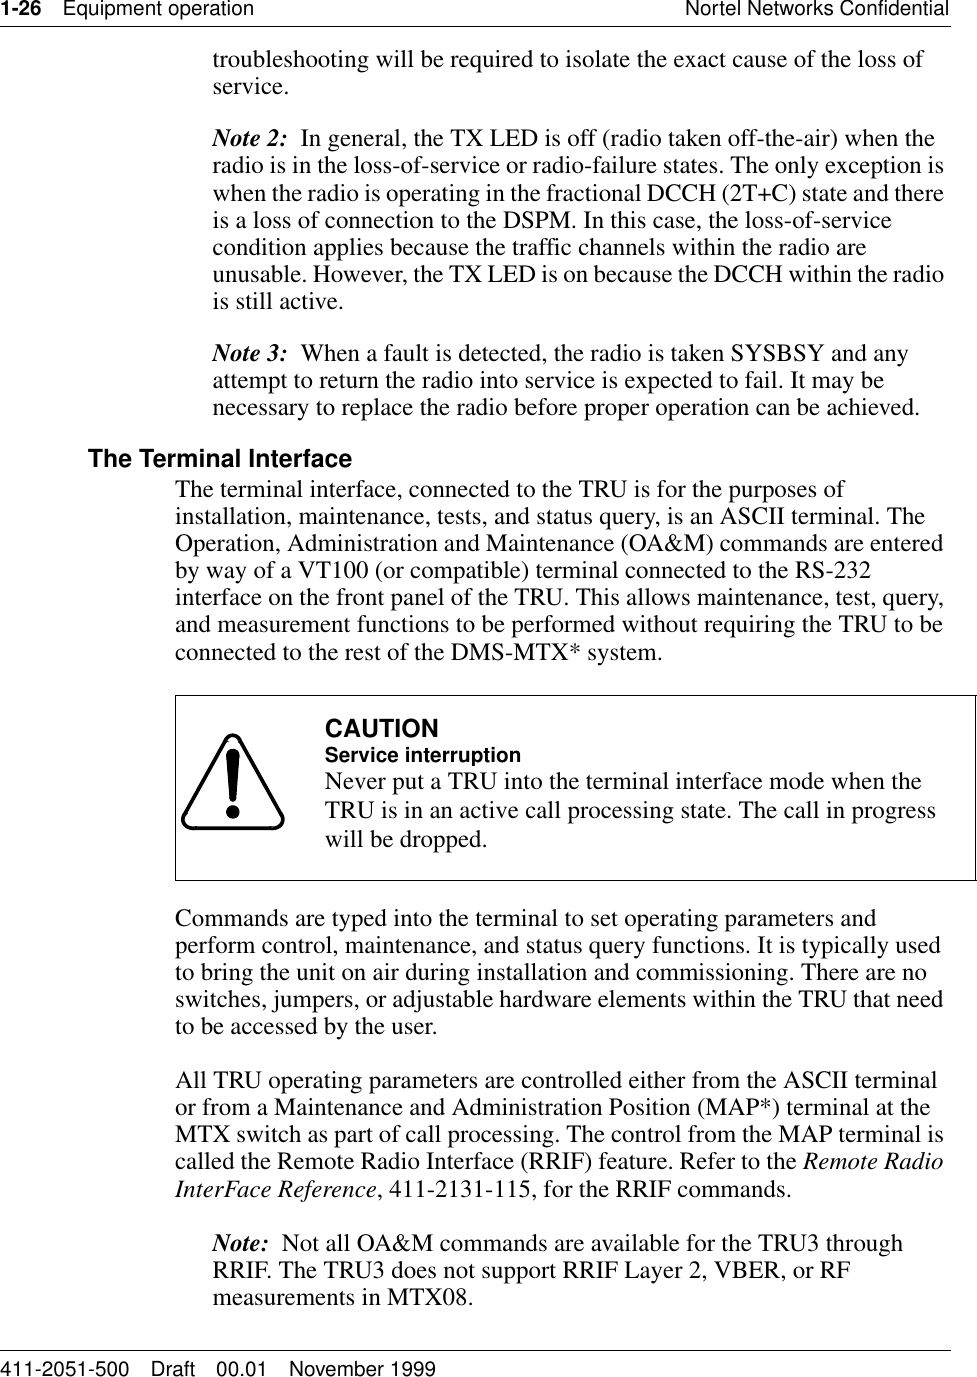 1-26 Equipment operation Nortel Networks Confidential411-2051-500 Draft 00.01 November 1999troubleshooting will be required to isolate the exact cause of the loss of service.Note 2:  In general, the TX LED is off (radio taken off-the-air) when the radio is in the loss-of-service or radio-failure states. The only exception is when the radio is operating in the fractional DCCH (2T+C) state and there is a loss of connection to the DSPM. In this case, the loss-of-service condition applies because the traffic channels within the radio are unusable. However, the TX LED is on because the DCCH within the radio is still active.Note 3:  When a fault is detected, the radio is taken SYSBSY and any attempt to return the radio into service is expected to fail. It may be necessary to replace the radio before proper operation can be achieved. The Terminal InterfaceThe terminal interface, connected to the TRU is for the purposes of installation, maintenance, tests, and status query, is an ASCII terminal. The Operation, Administration and Maintenance (OA&amp;M) commands are entered by way of a VT100 (or compatible) terminal connected to the RS-232 interface on the front panel of the TRU. This allows maintenance, test, query, and measurement functions to be performed without requiring the TRU to be connected to the rest of the DMS-MTX* system.Commands are typed into the terminal to set operating parameters and perform control, maintenance, and status query functions. It is typically used to bring the unit on air during installation and commissioning. There are no switches, jumpers, or adjustable hardware elements within the TRU that need to be accessed by the user.All TRU operating parameters are controlled either from the ASCII terminal or from a Maintenance and Administration Position (MAP*) terminal at the MTX switch as part of call processing. The control from the MAP terminal is called the Remote Radio Interface (RRIF) feature. Refer to the Remote Radio InterFace Reference, 411-2131-115, for the RRIF commands.Note:  Not all OA&amp;M commands are available for the TRU3 through RRIF. The TRU3 does not support RRIF Layer 2, VBER, or RF measurements in MTX08.CAUTIONService interruptionNever put a TRU into the terminal interface mode when the TRU is in an active call processing state. The call in progress will be dropped.